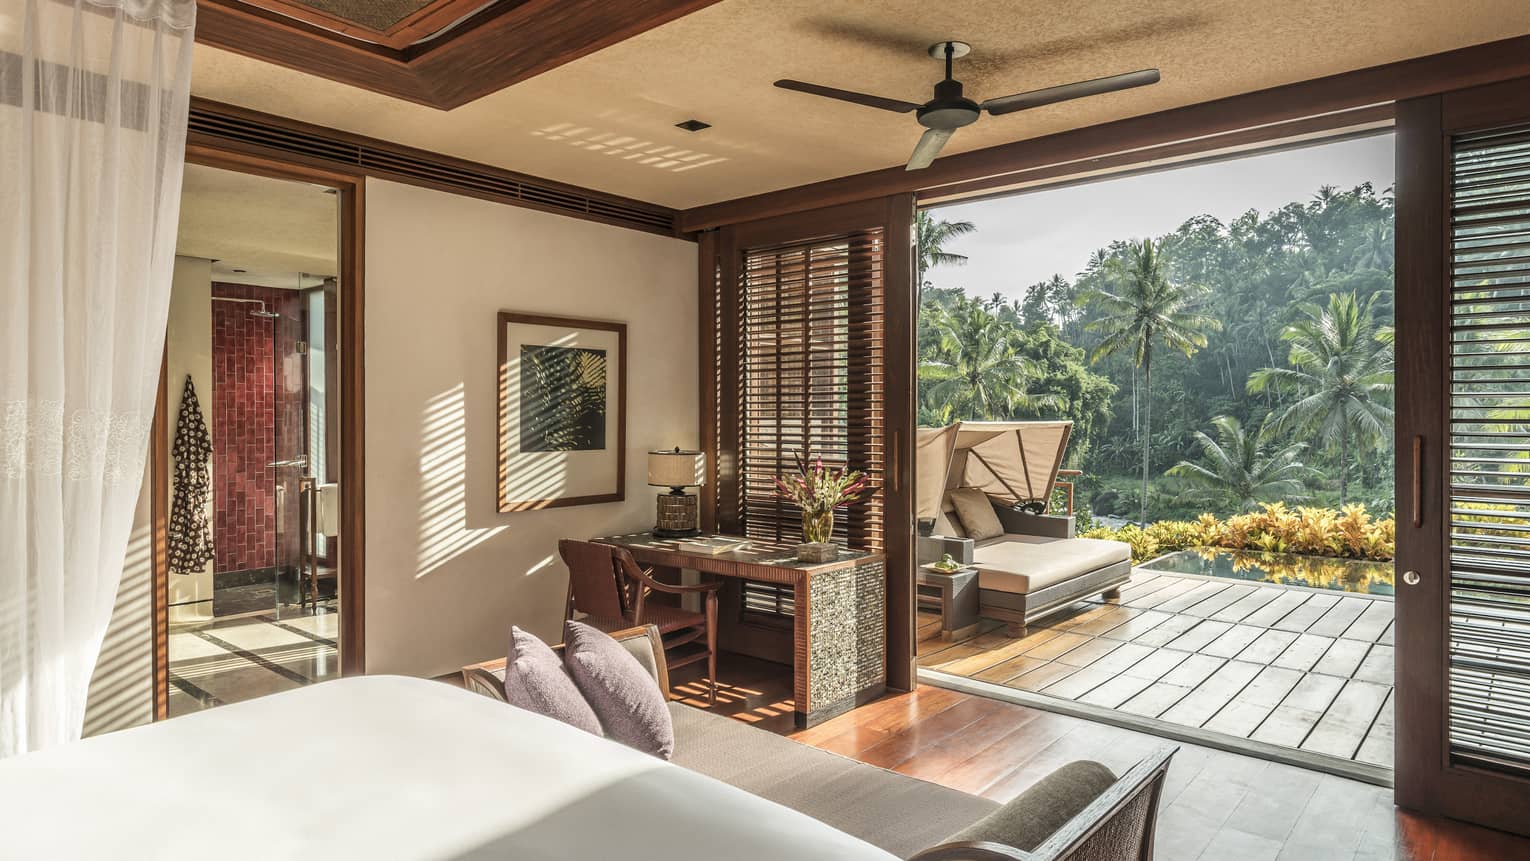 A scenic view from a spacious room overlooking a forest and river in Bali